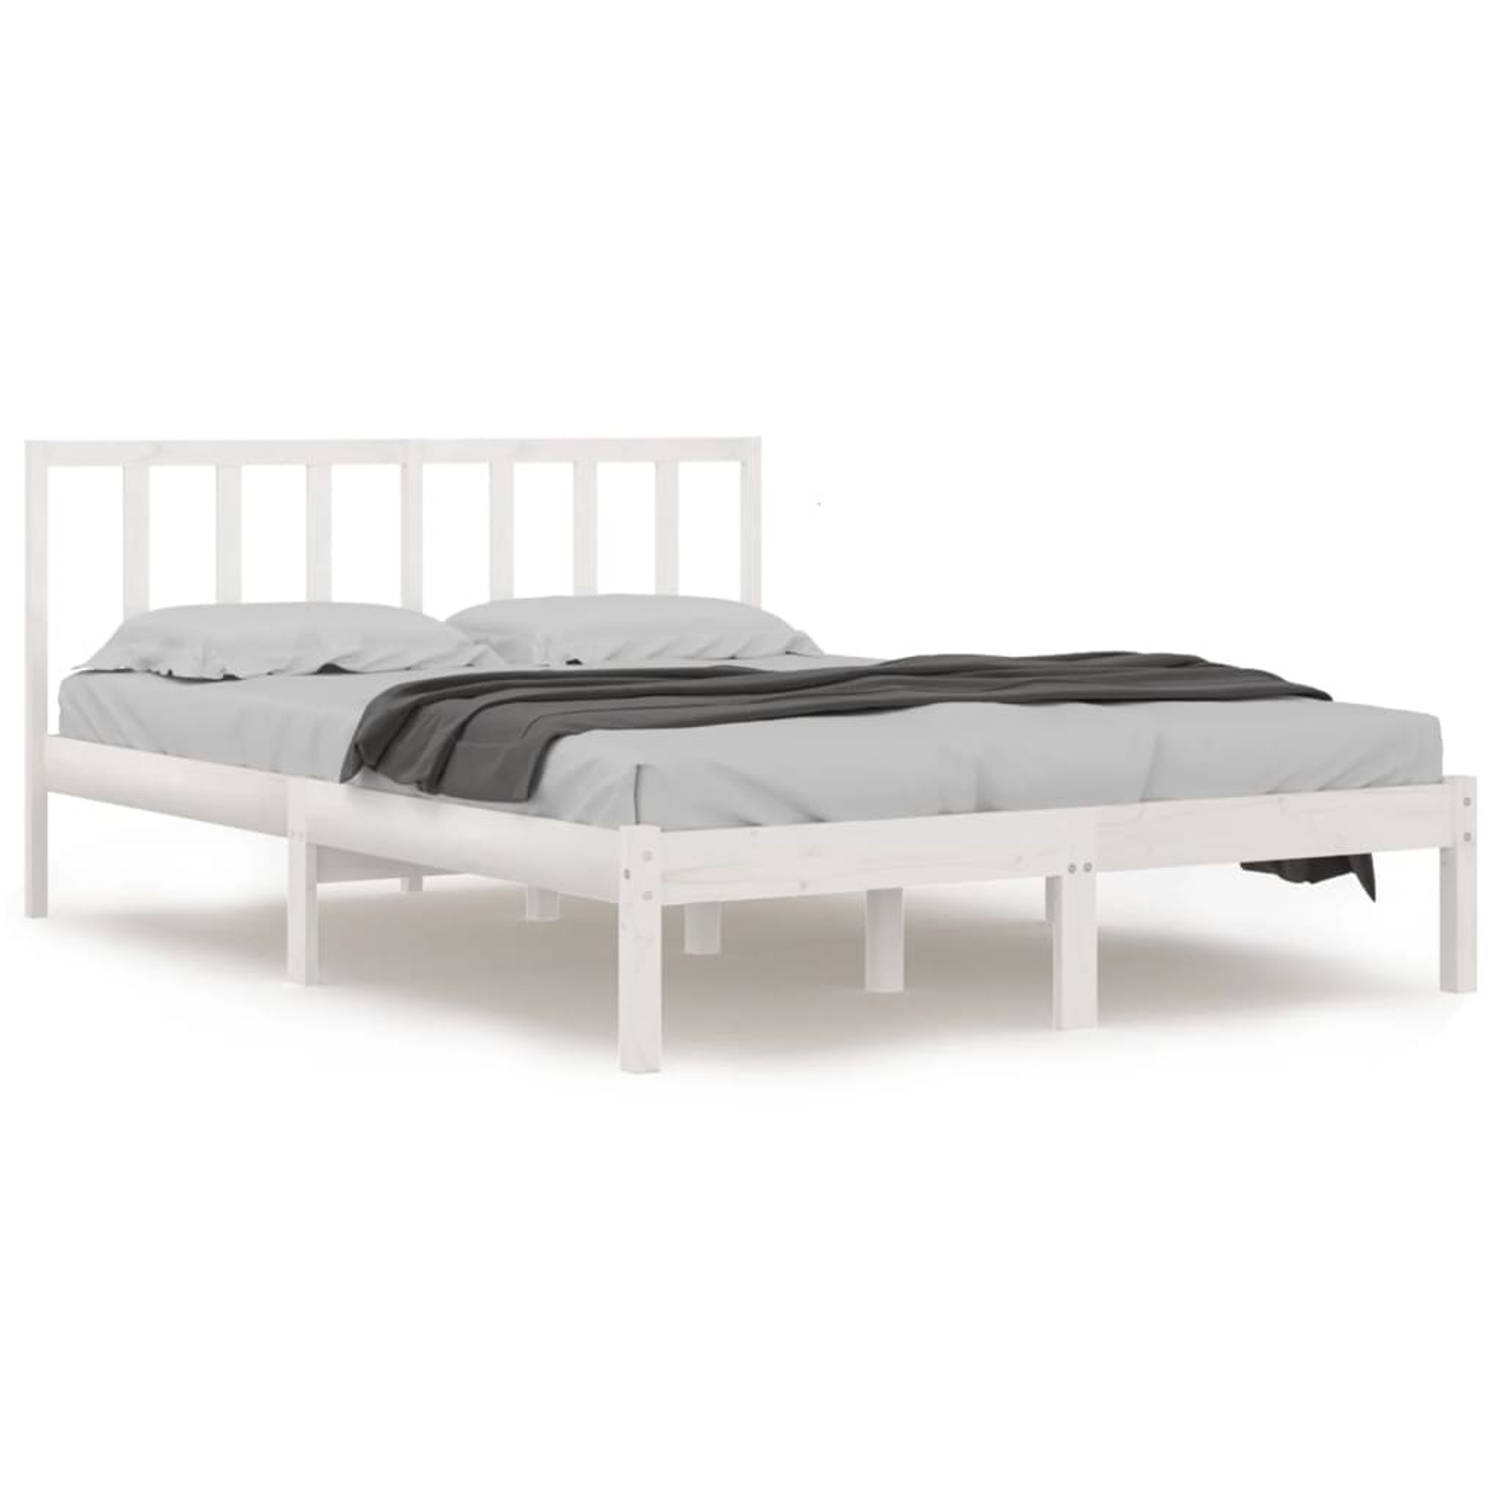 The Living Store Bedframe massief grenenhout wit 150x200 cm 5FT King Size - Bed